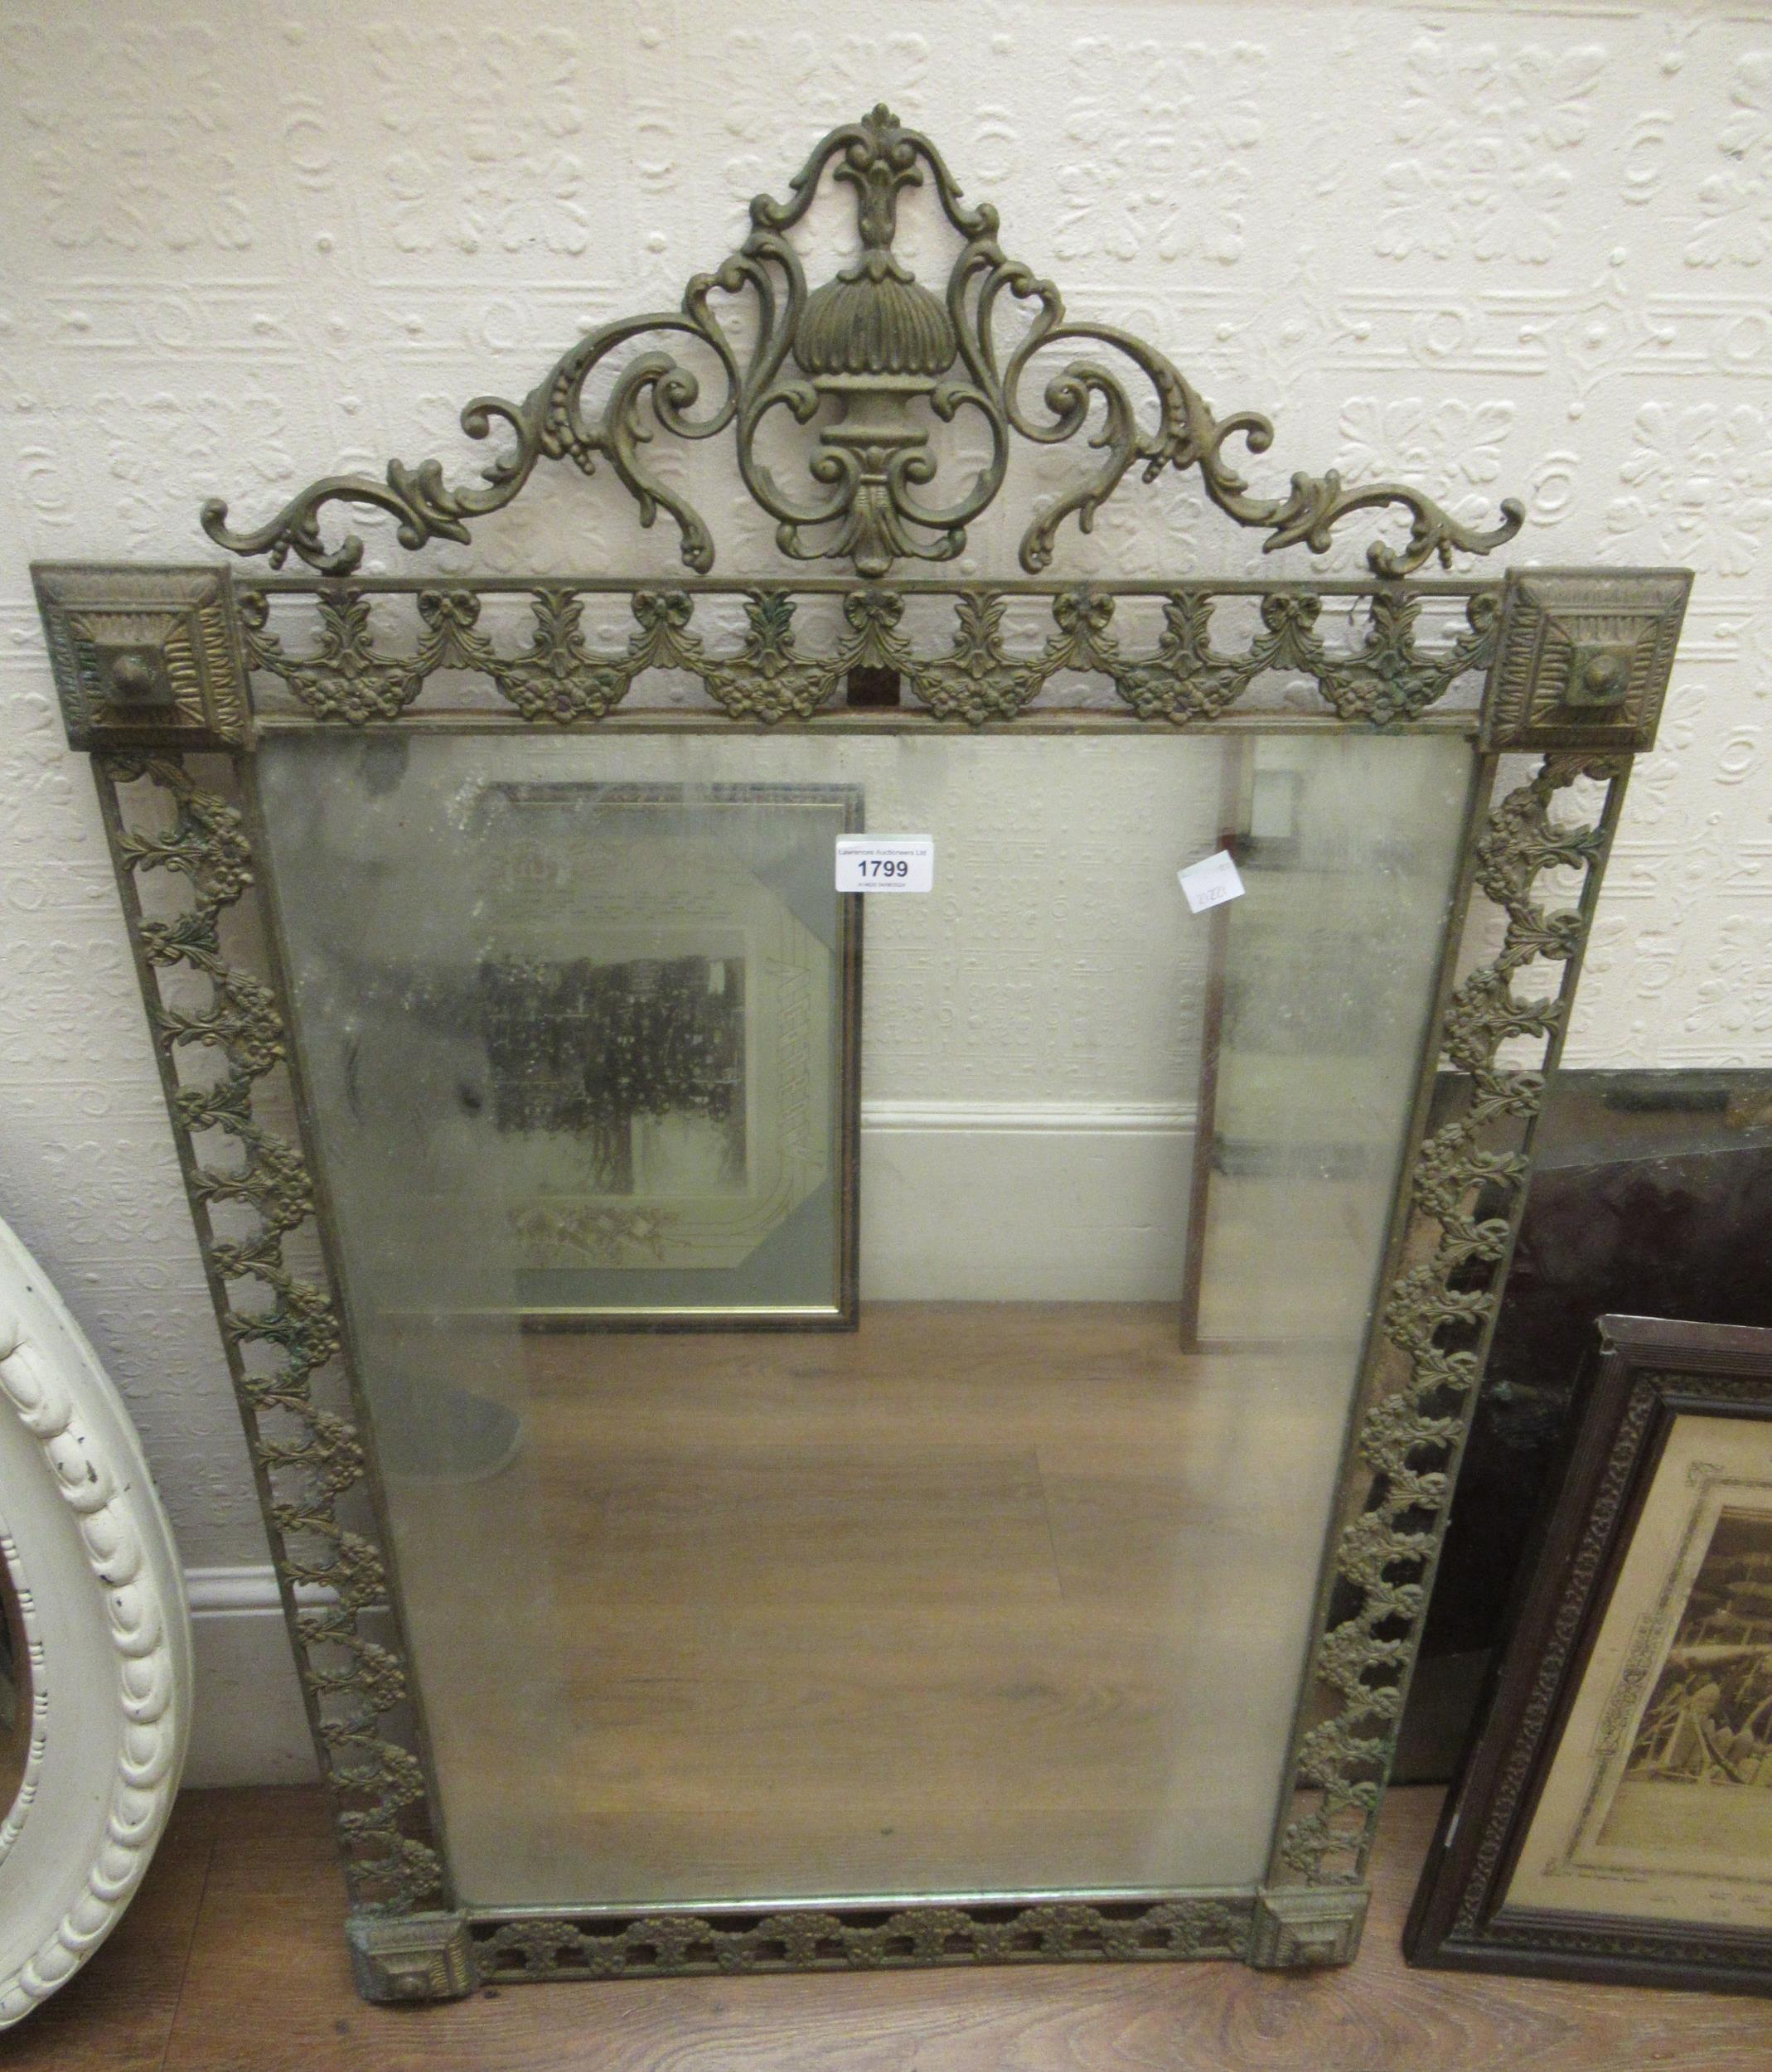 Reproduction pierced brass wall mirror, 96cm high, together with a copper kettle